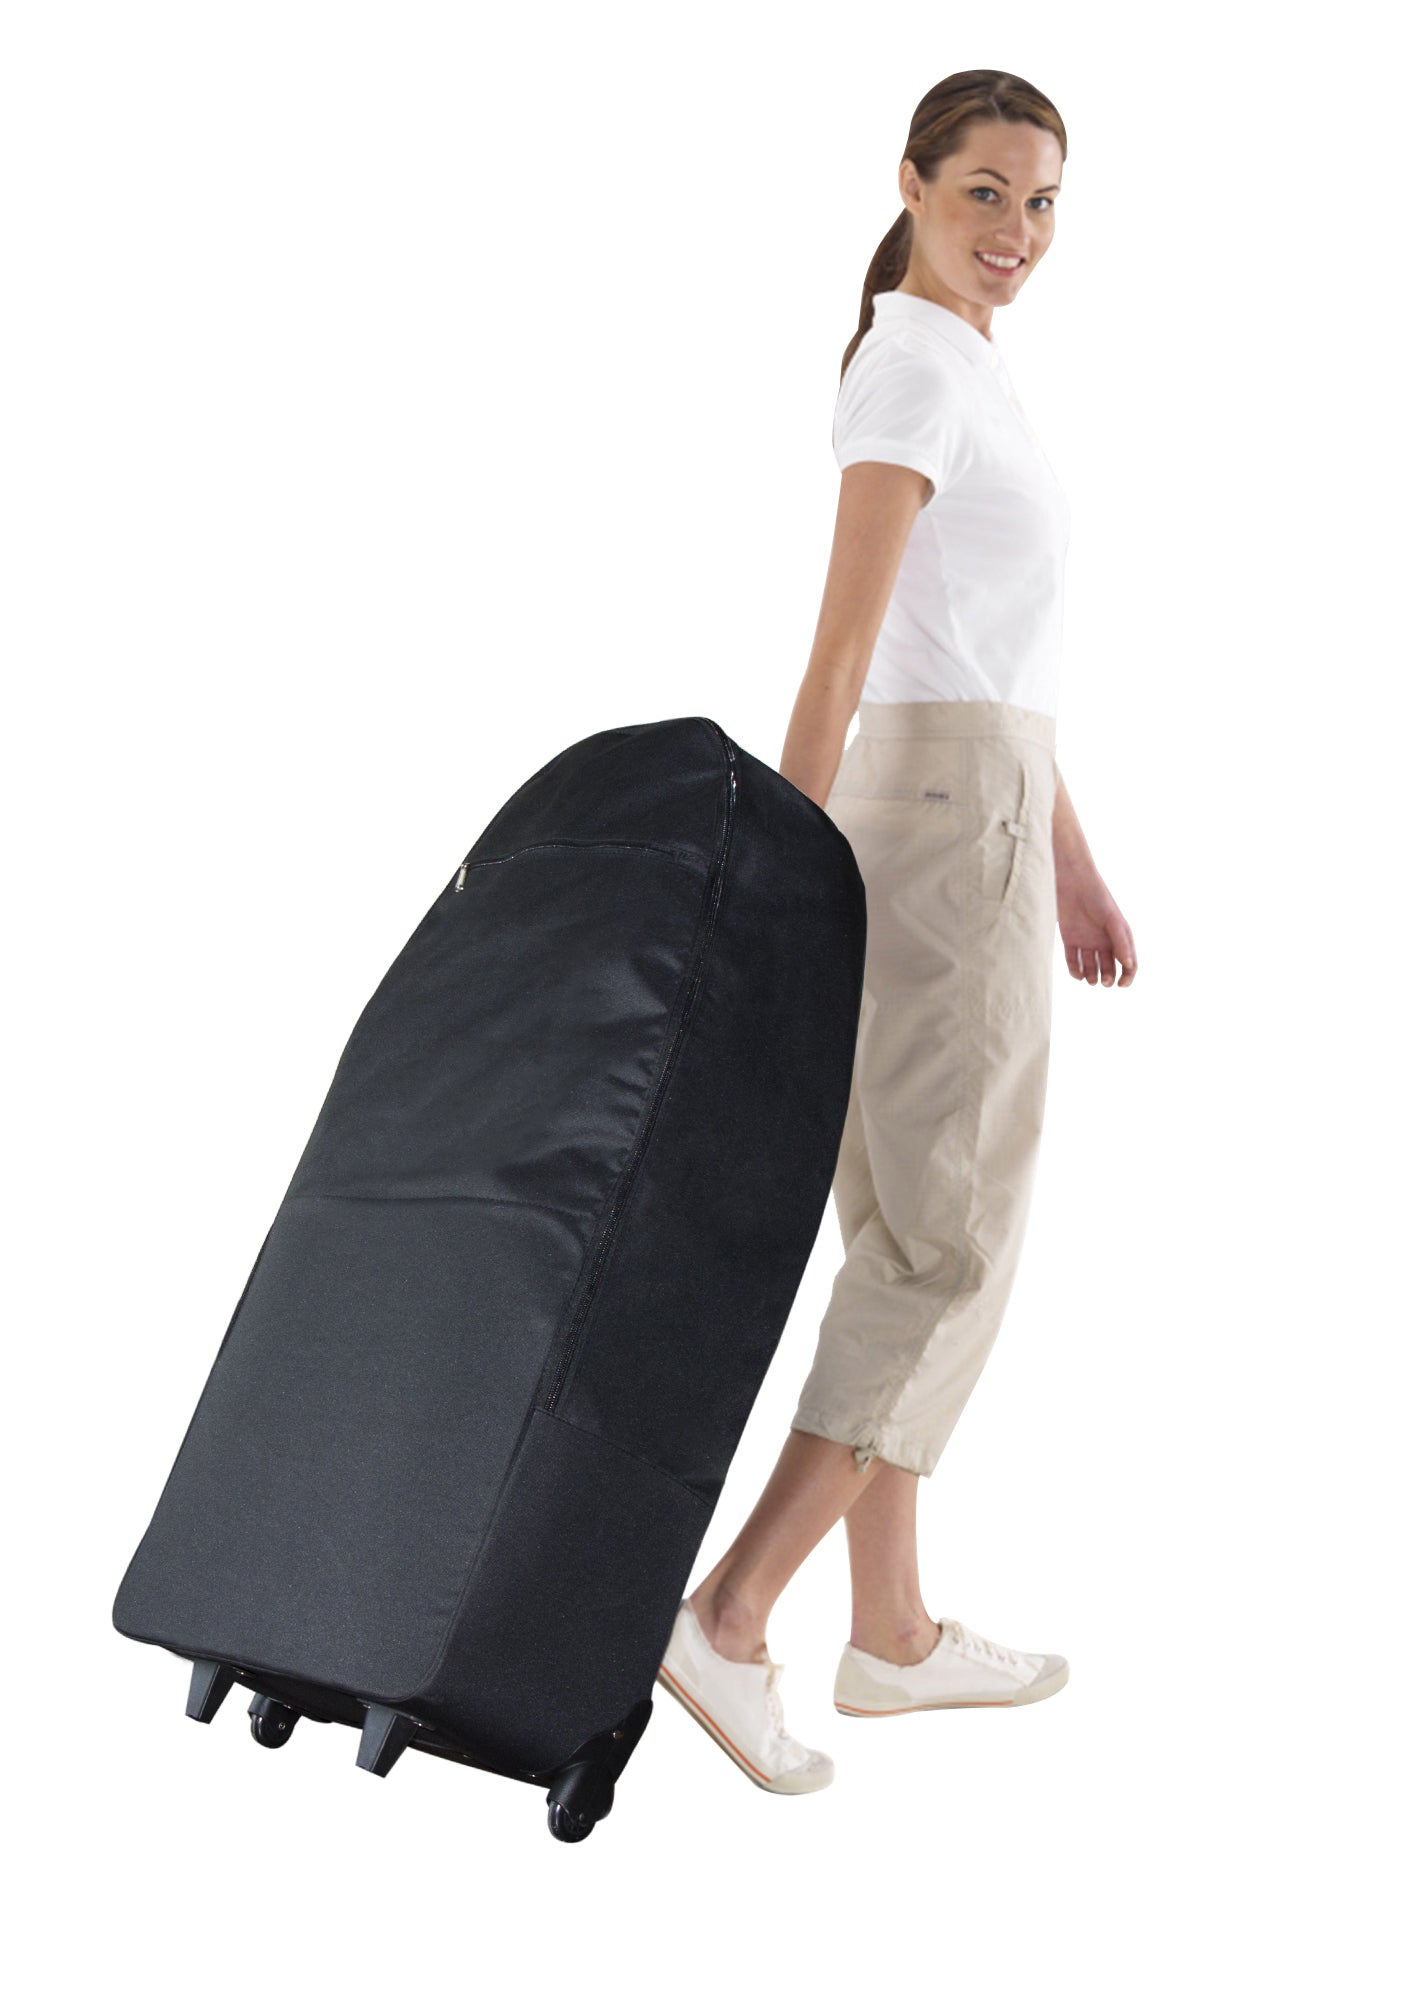 Master Massage - Wheeled Carrying Case for Professional Chair - Superb Massage Tables